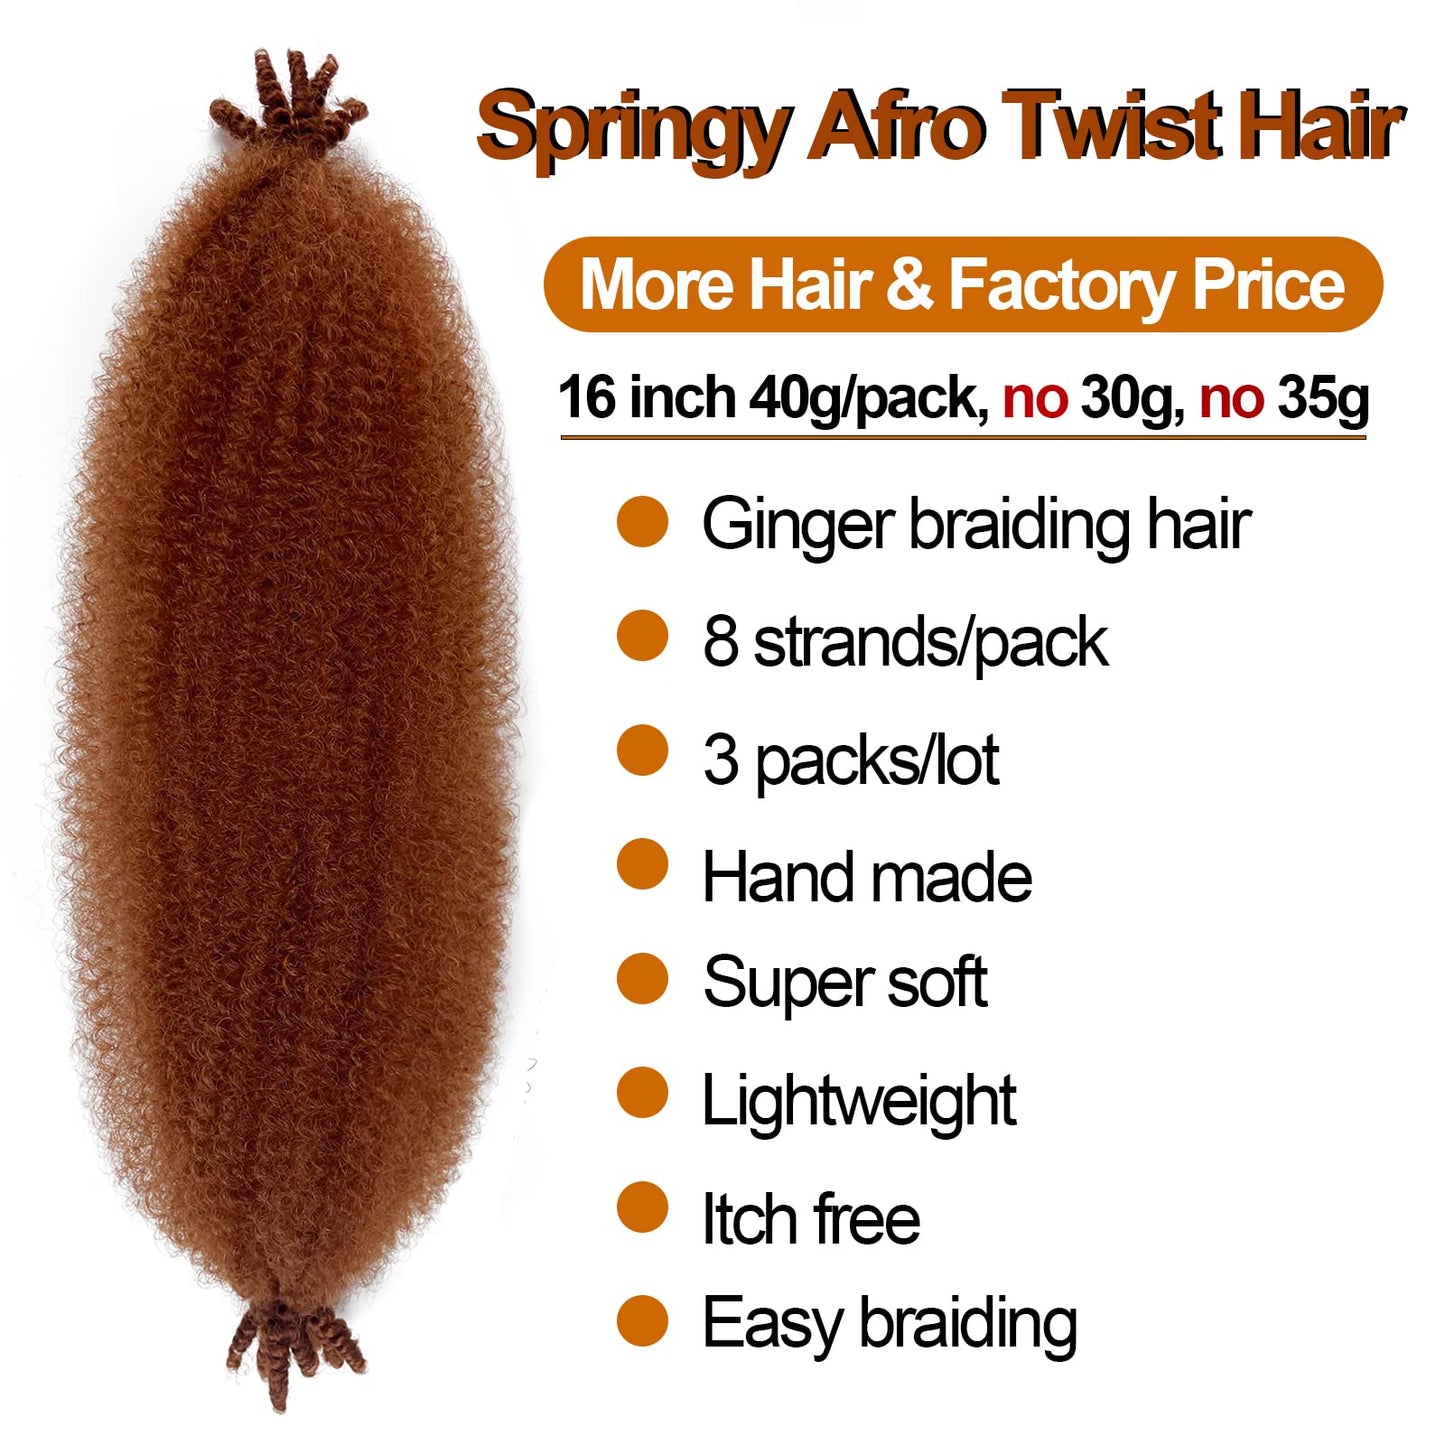 Marley Twist Braiding Hair 16 Inch Ginger Curly Braiding Hair 350 Springy Afro Twist Hair Red Copper Kinky Twist Hair for Braiding 3 Packs Cuban Twist Hair for Distressed Faux Locs (16in 8P 350)…